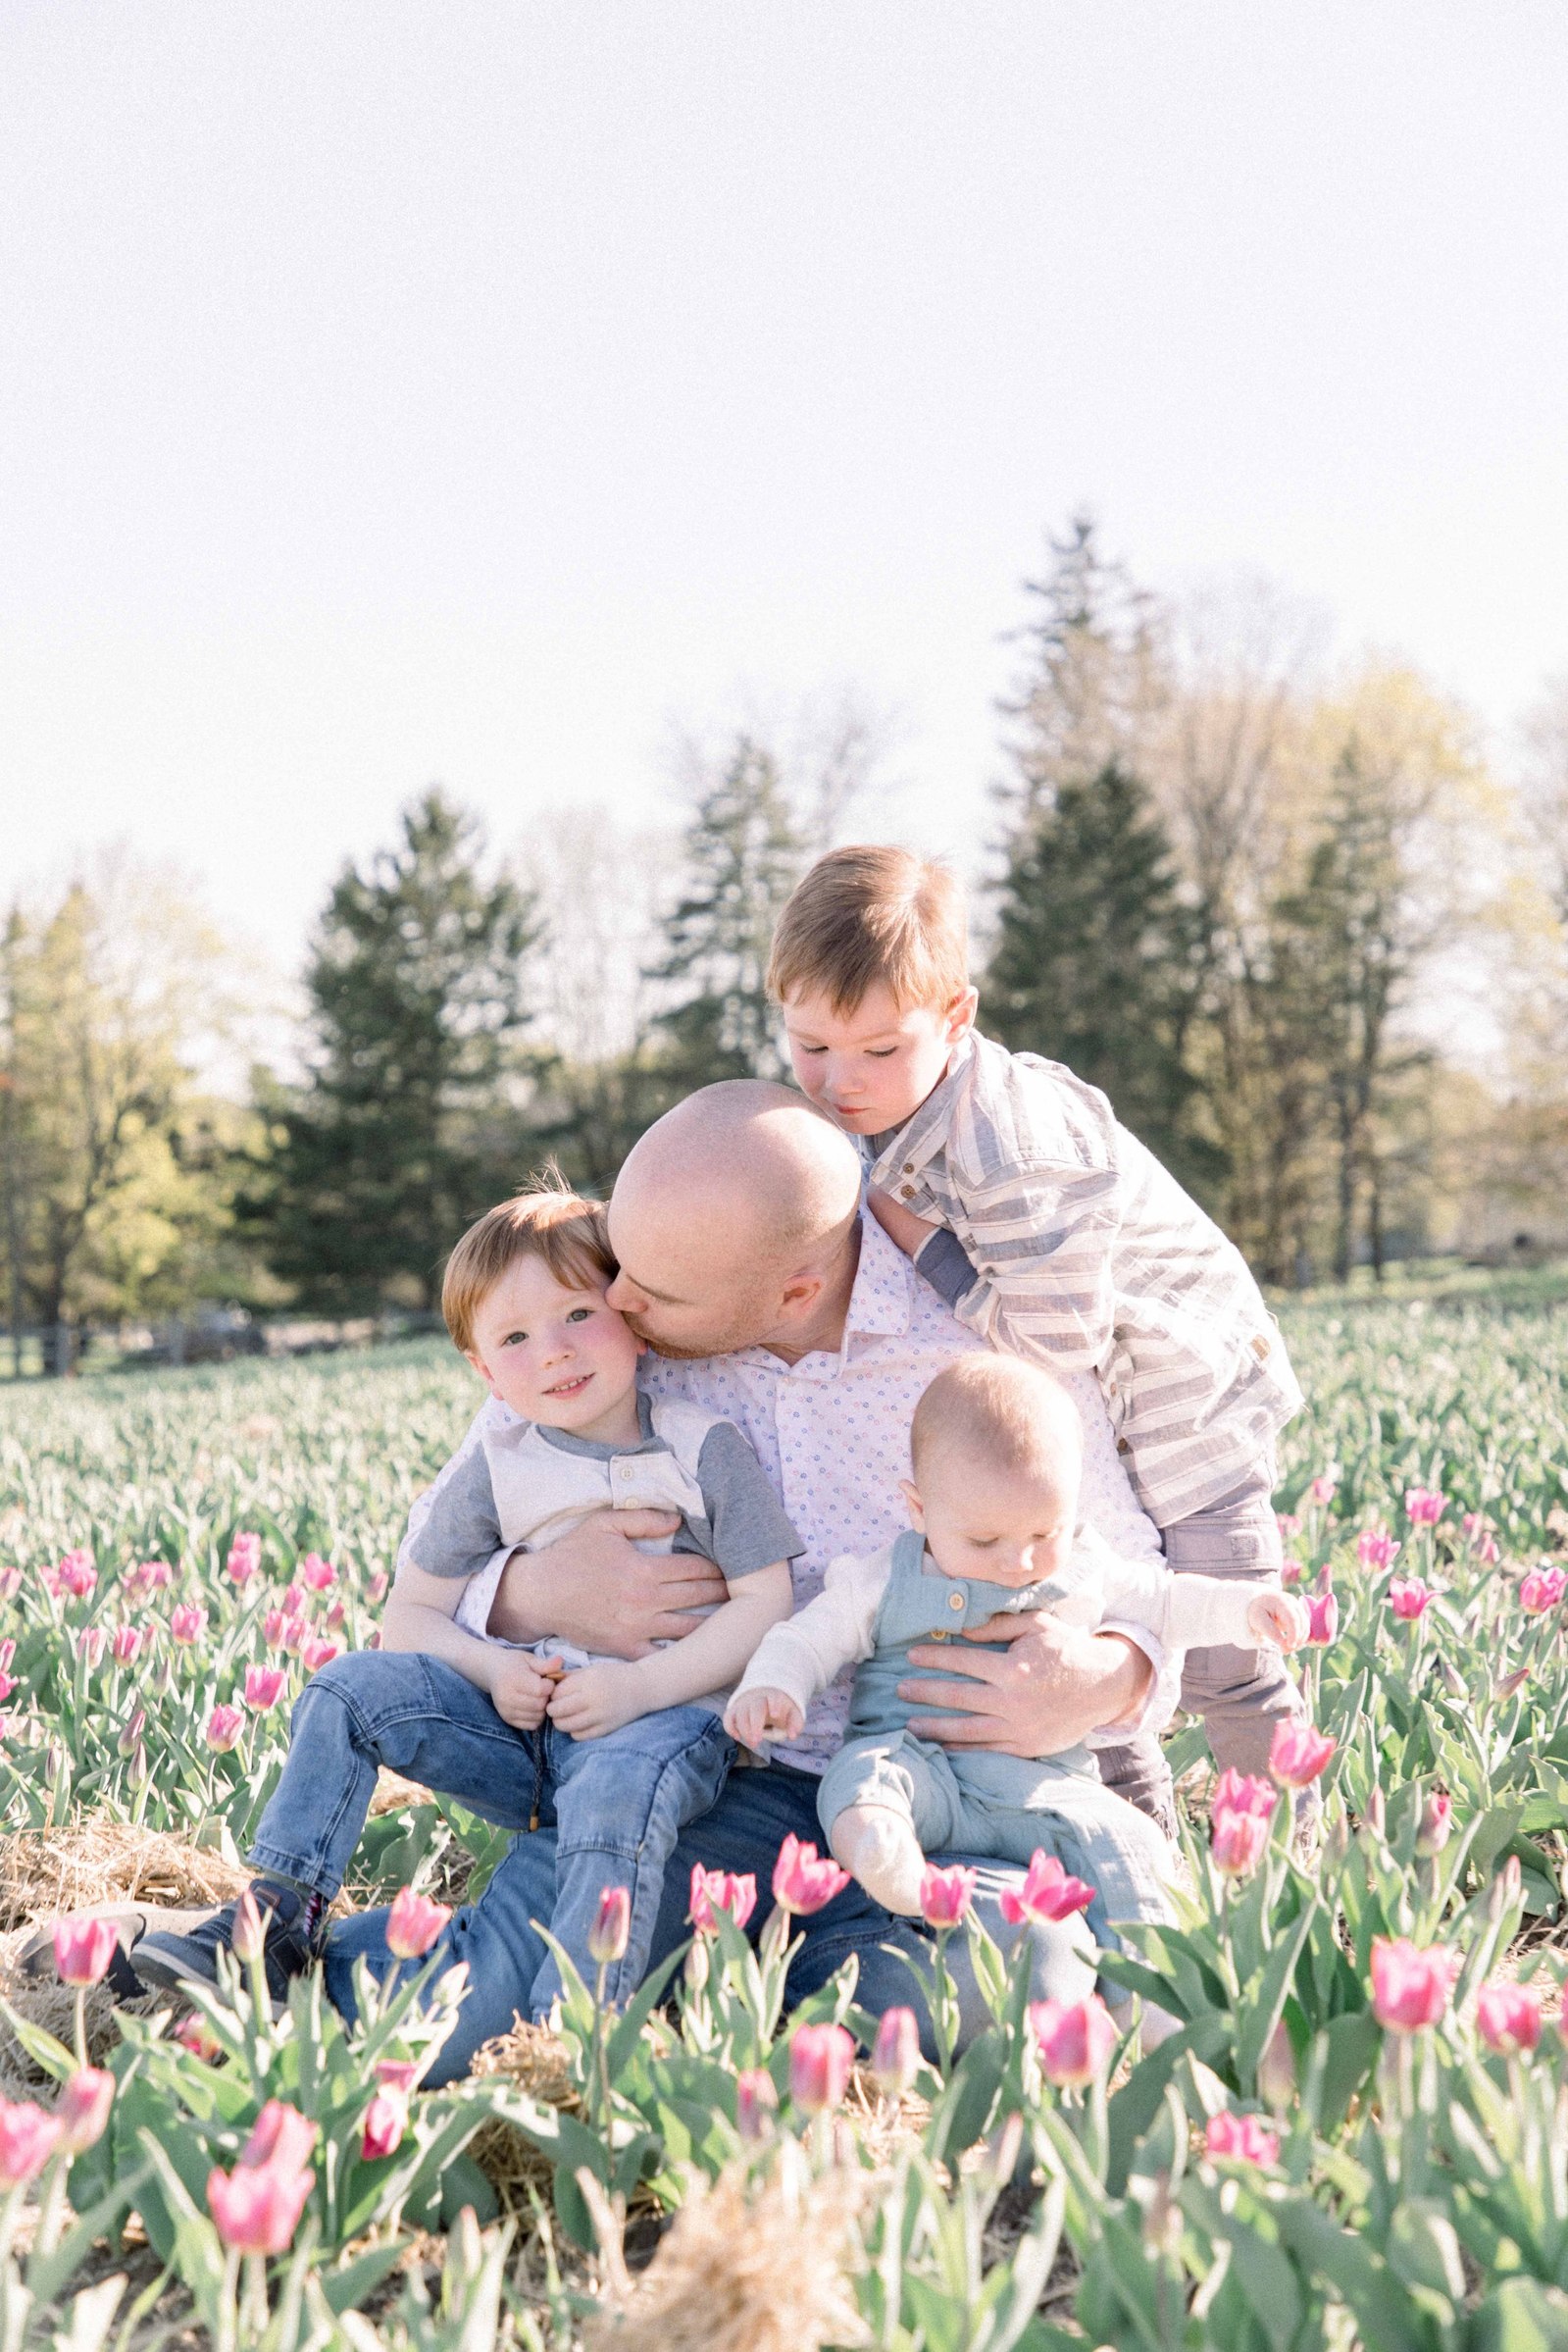 Portrait of father with three sons sitting in a tulip field. Father is kissing one son on the cheek. Vankleek Hill Portrait Photographer, L'Orignal, Champlain, Prescott-Russell, Family Photography, Candid Photography, Emily VanderBeek Photography.